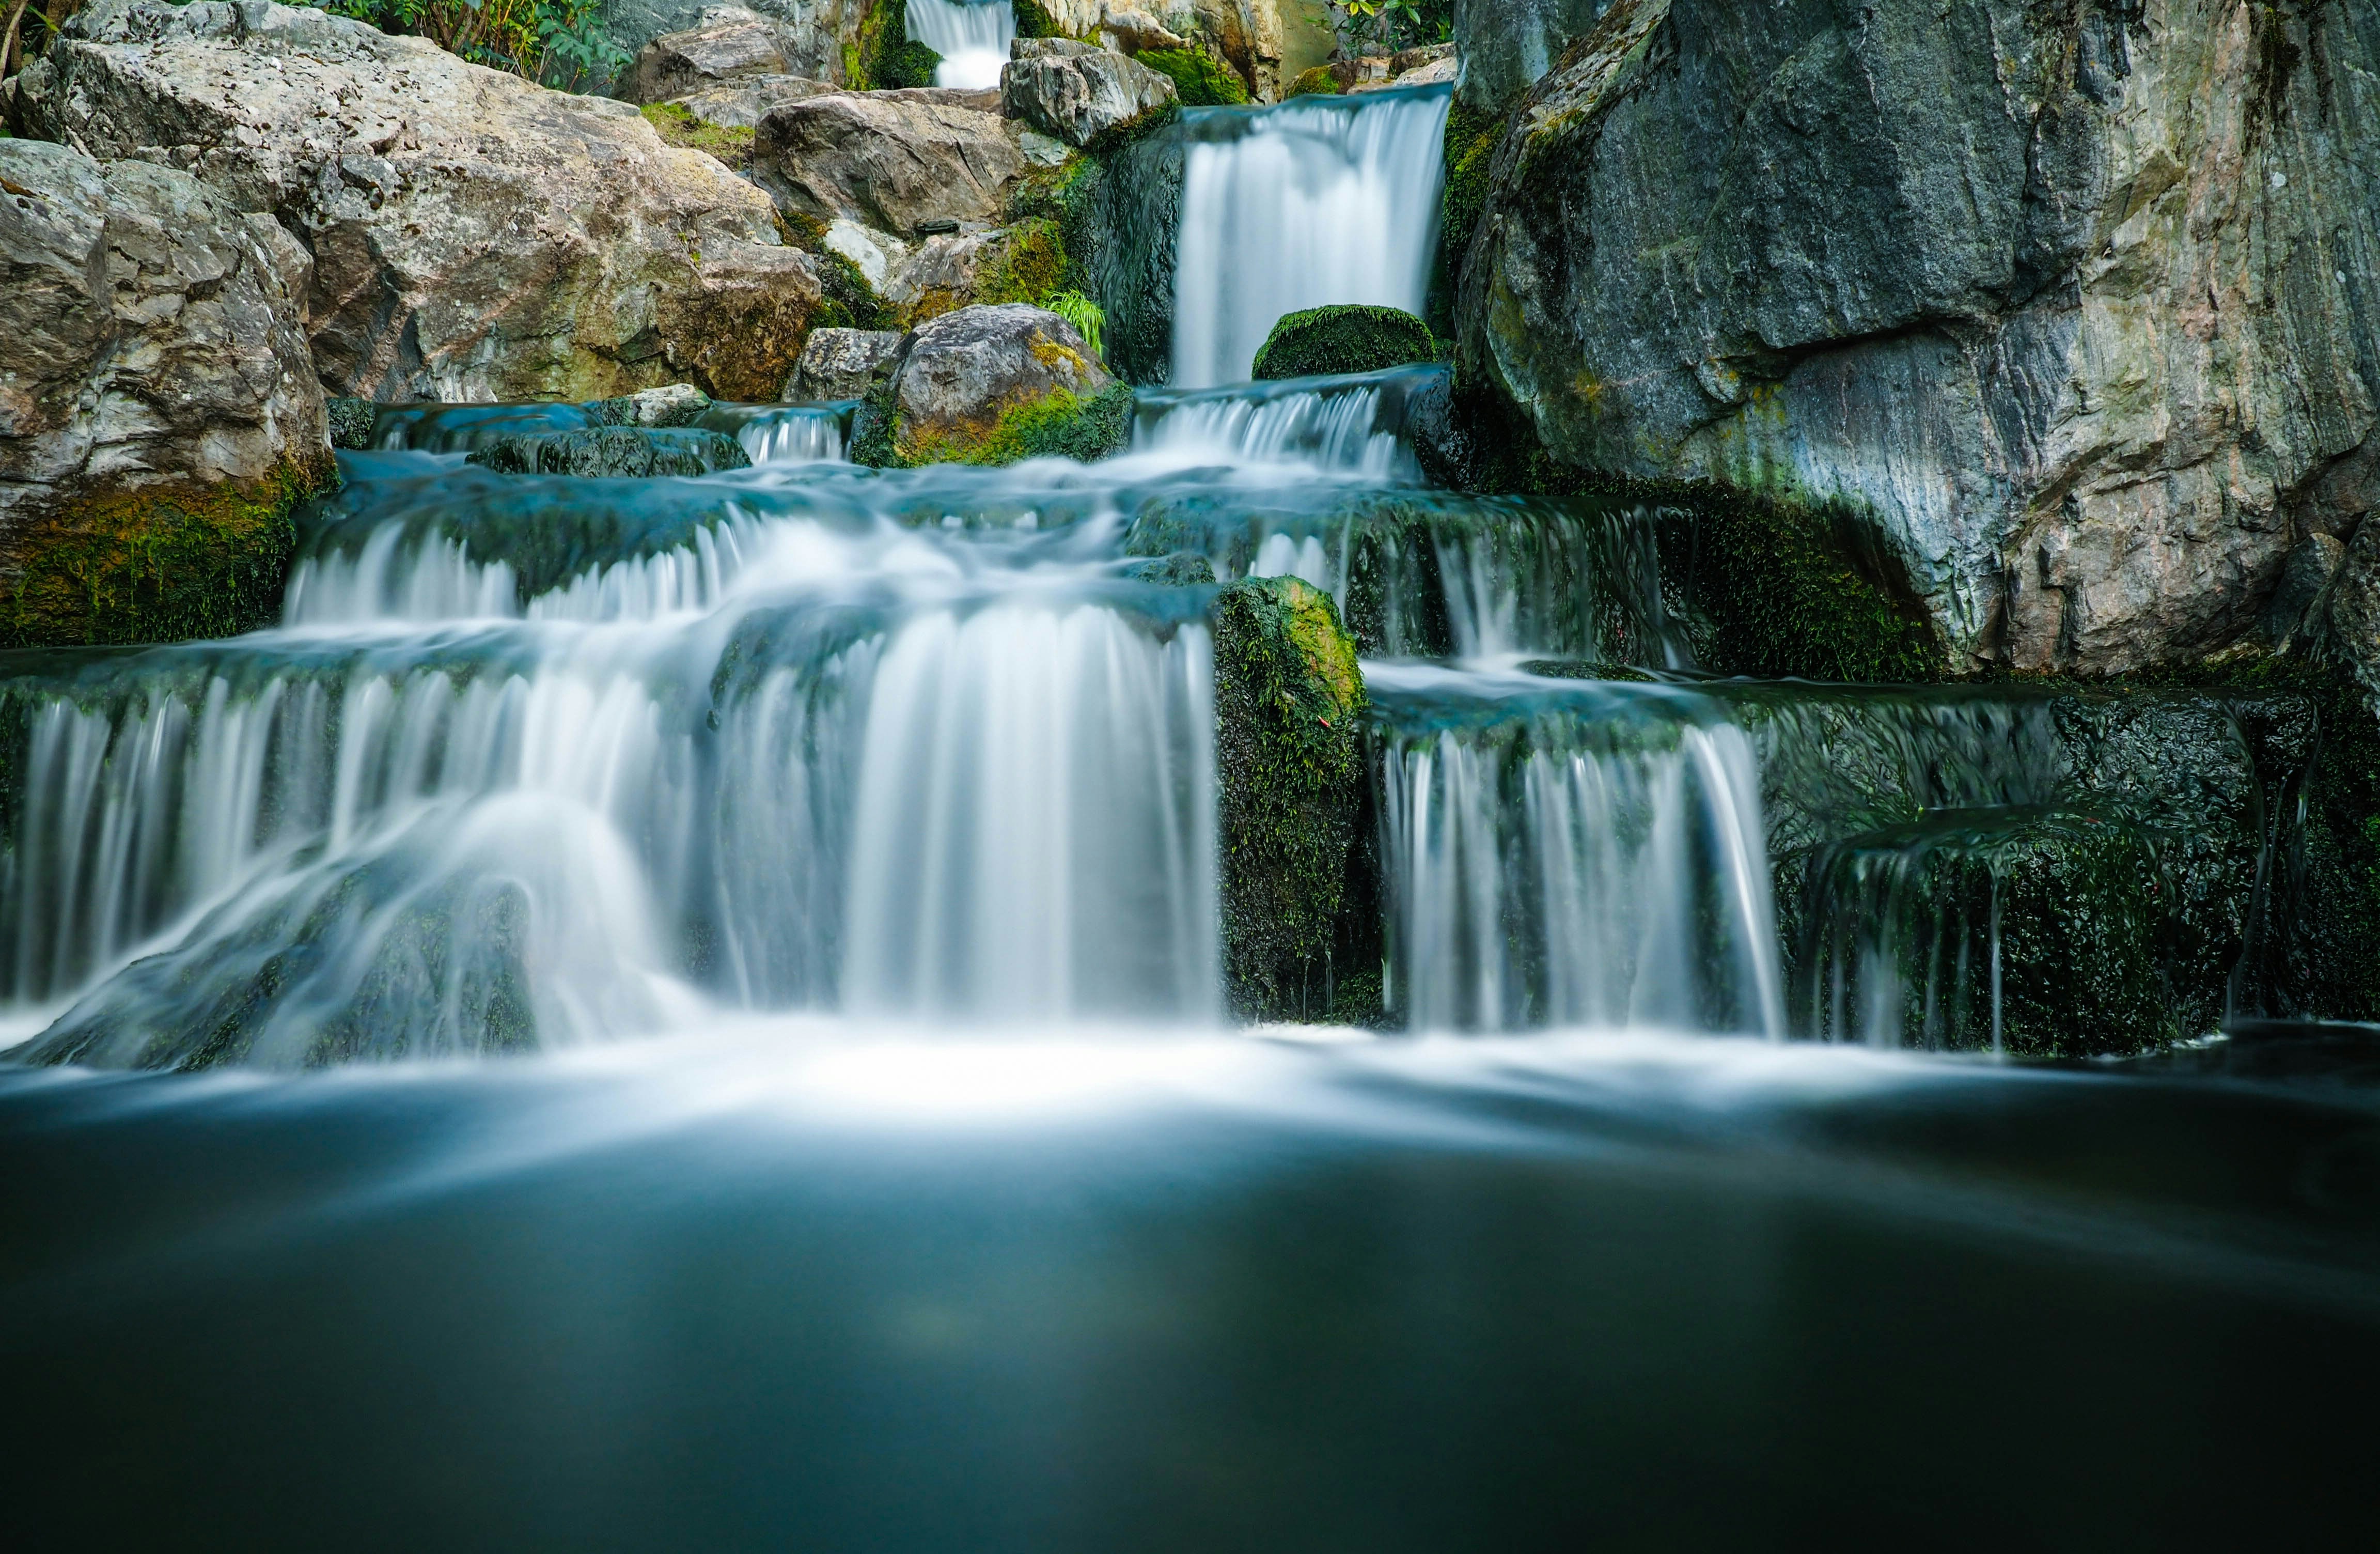 &quot;Long exposure shot of a waterfall in the \u2018Kyoto Garden\u2019 in Holland Park.&quot;